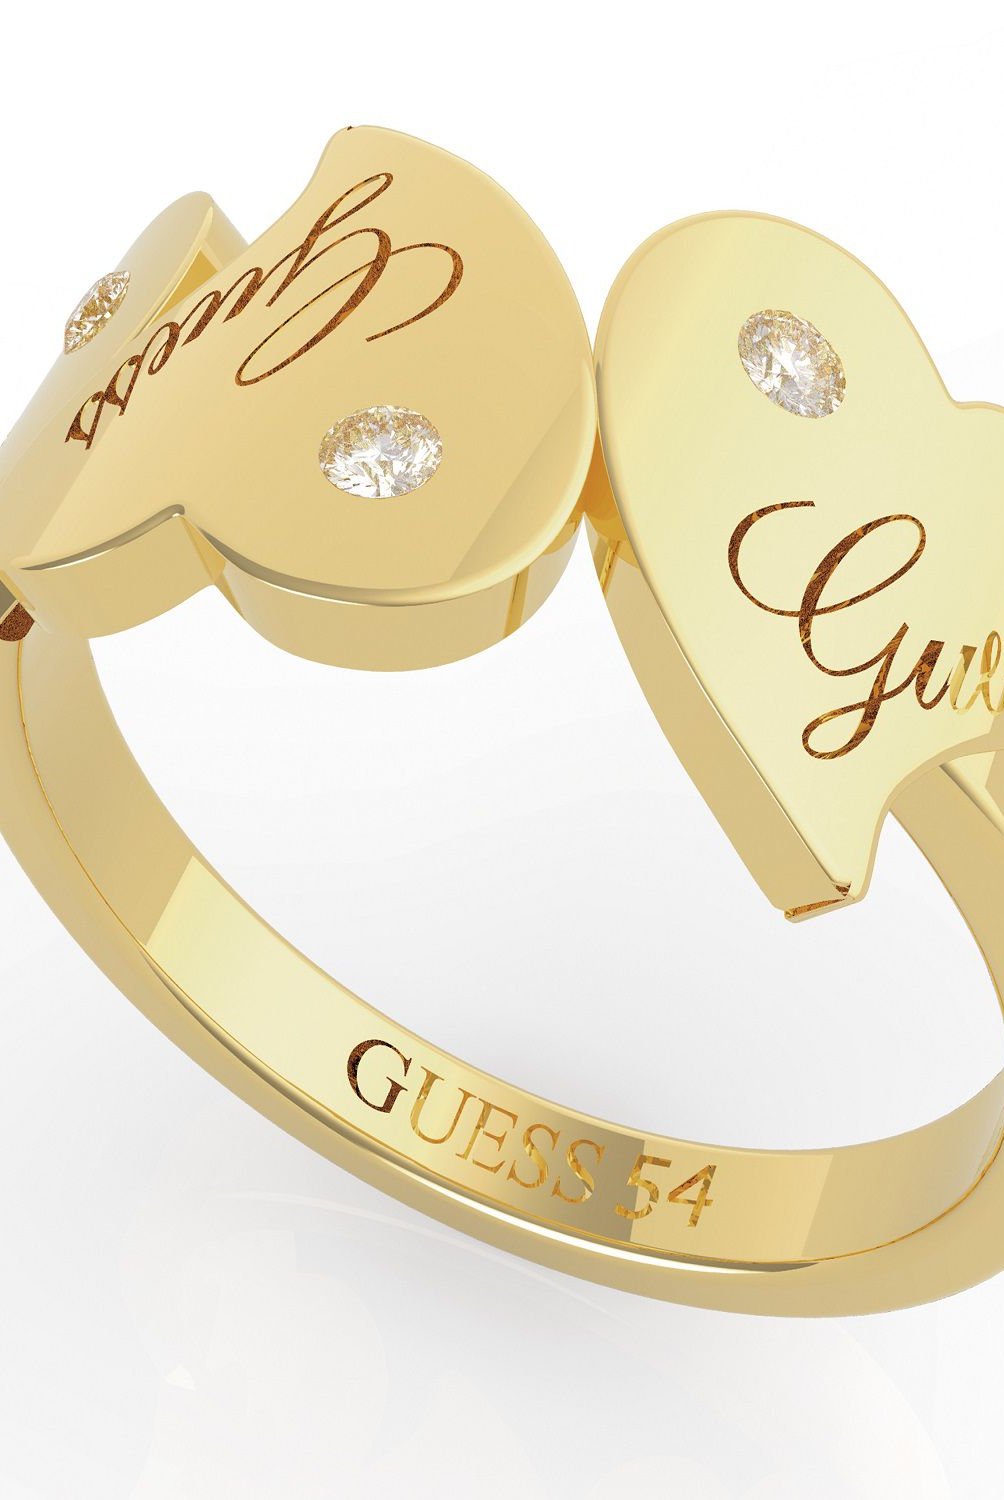 Guess - Anillo Guess Queen of Heart